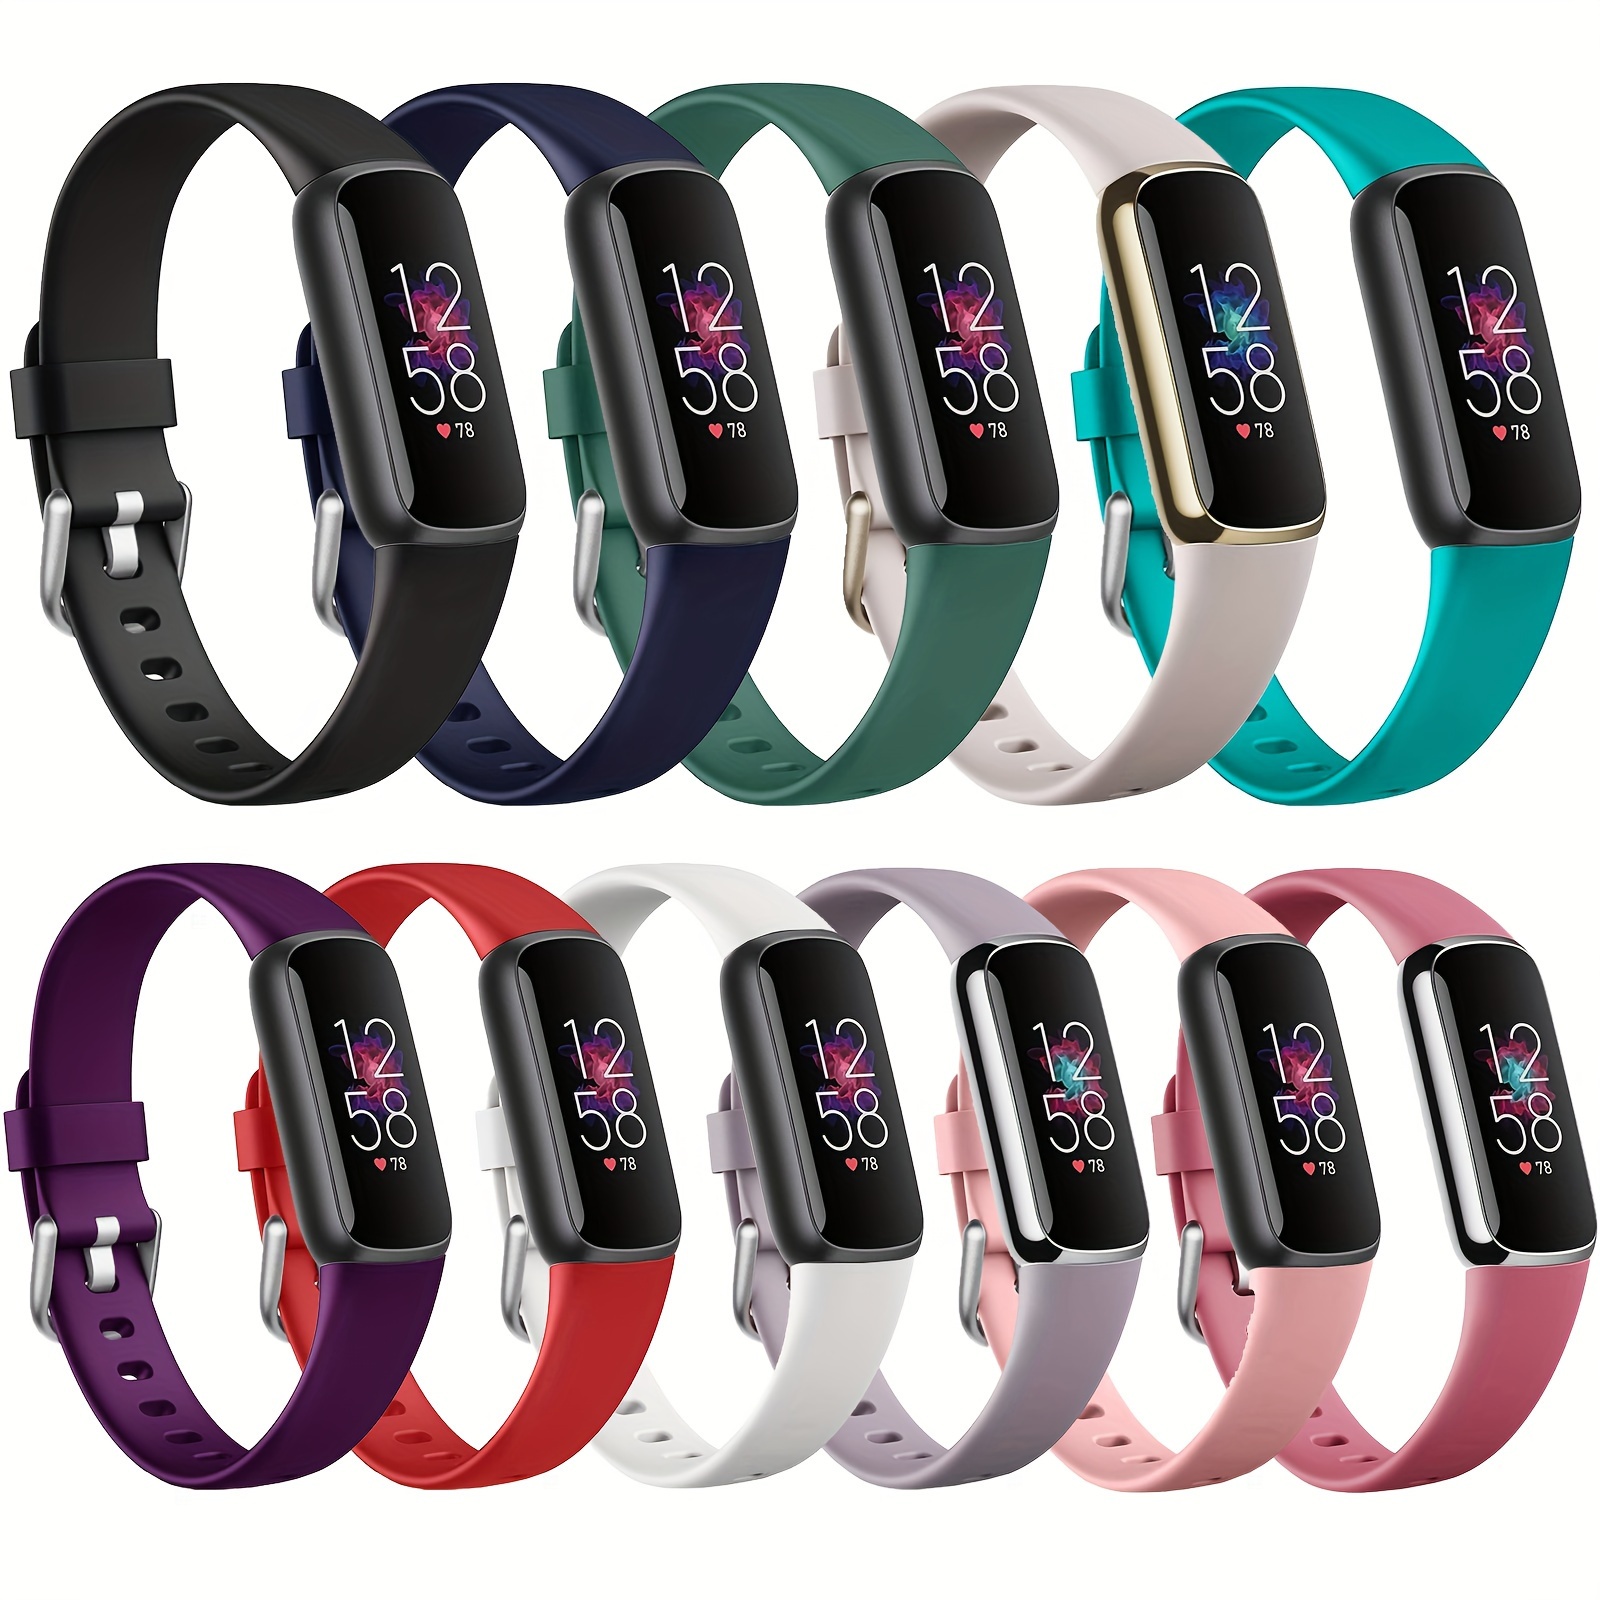 honecumi Bands Replacement for Fitbit Charge 4/ Charge 3/ Charge 3 SE Bands  for Women Large, Charge 4 Silicone Sports Band Wristband Strap Bracelet